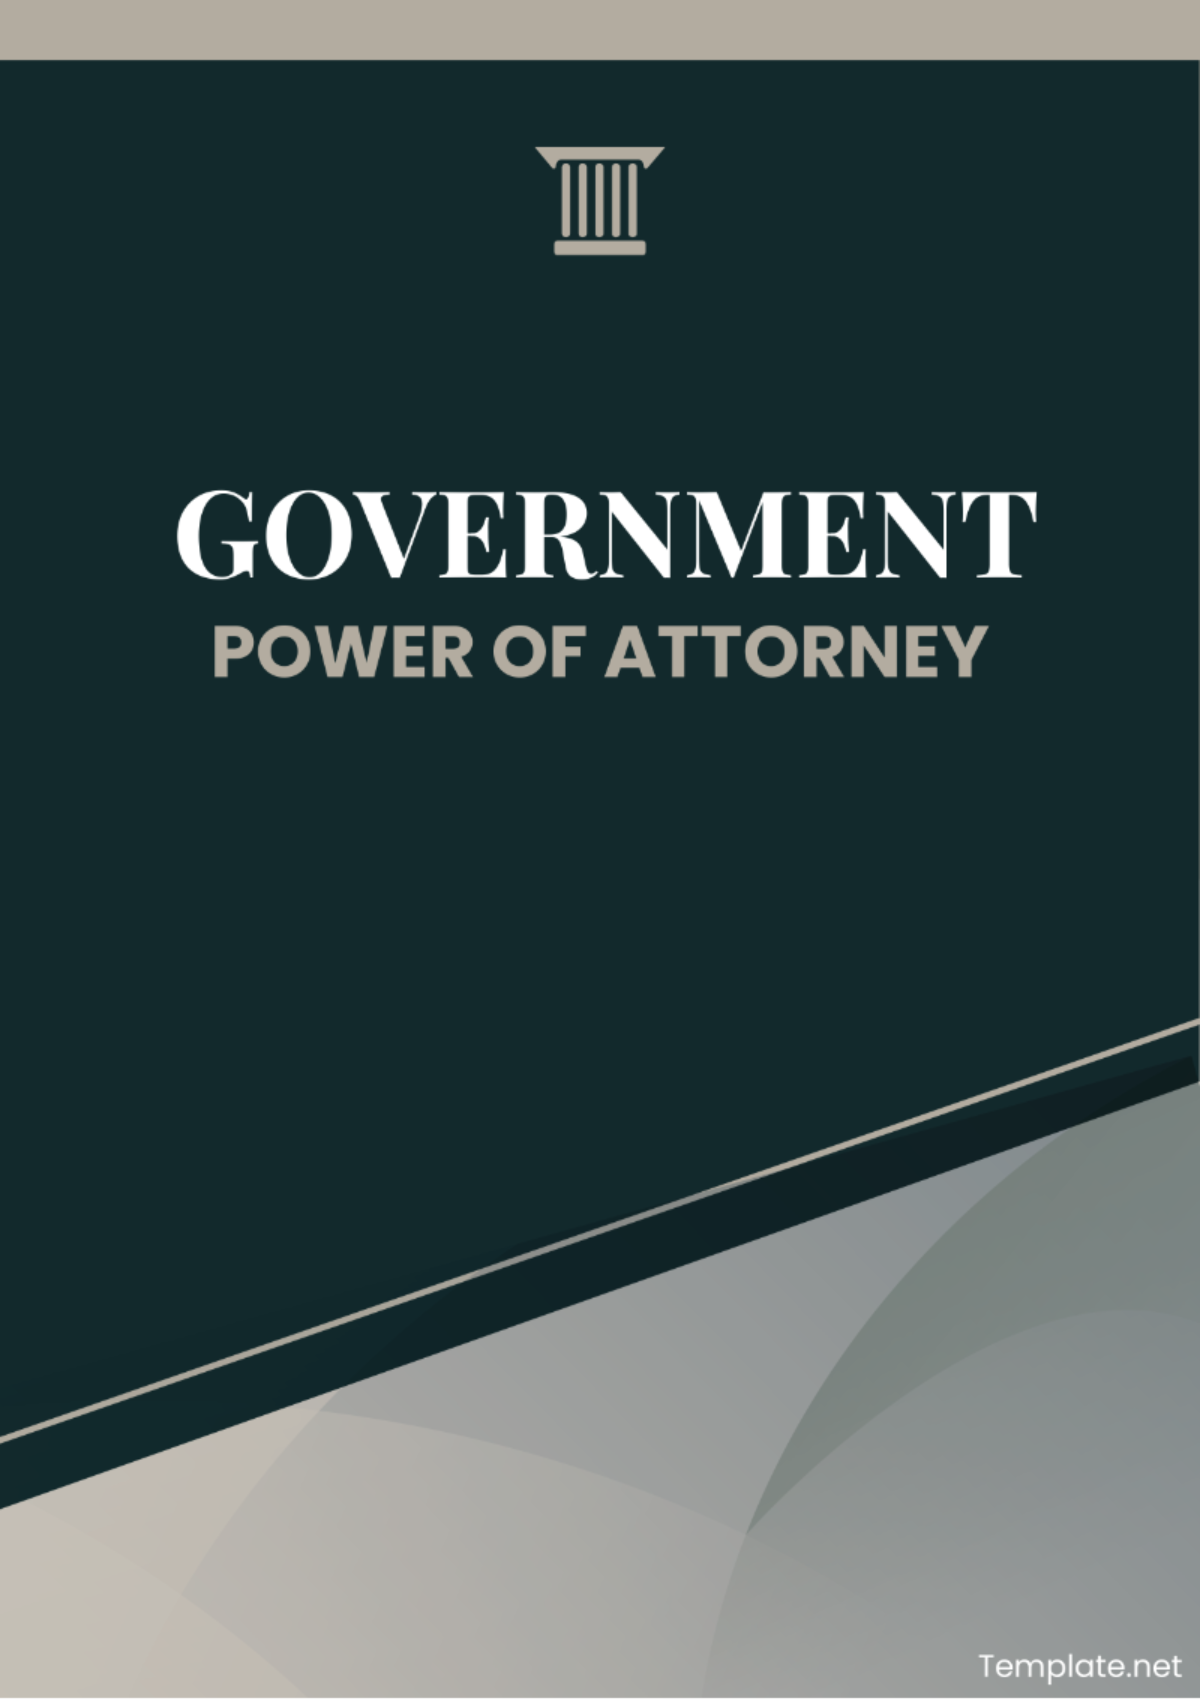 Government Power of Attorney Template